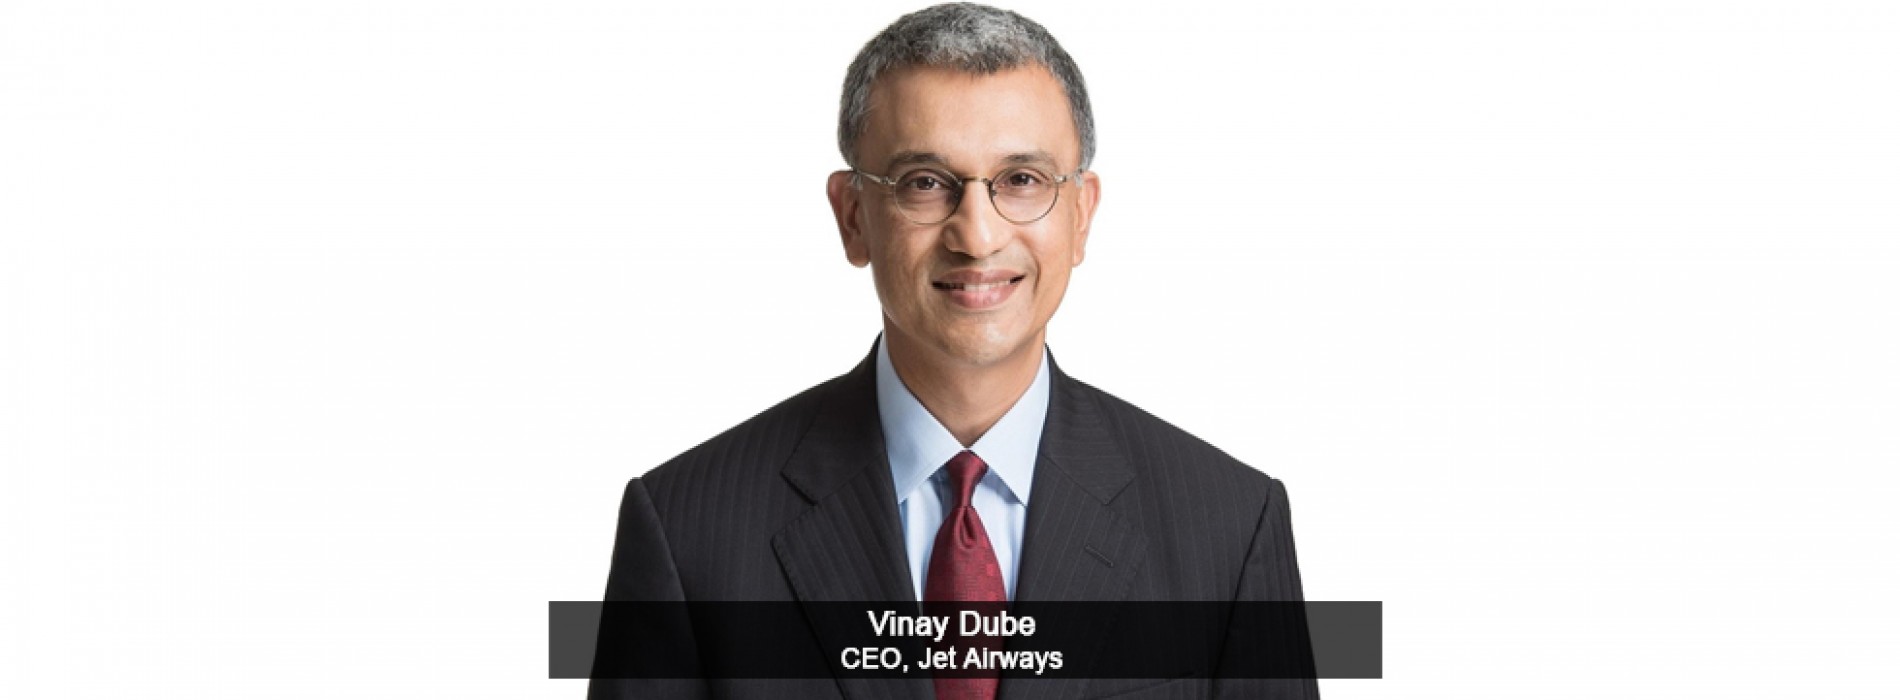 Vinay Dube joins as CEO of Jet Airways